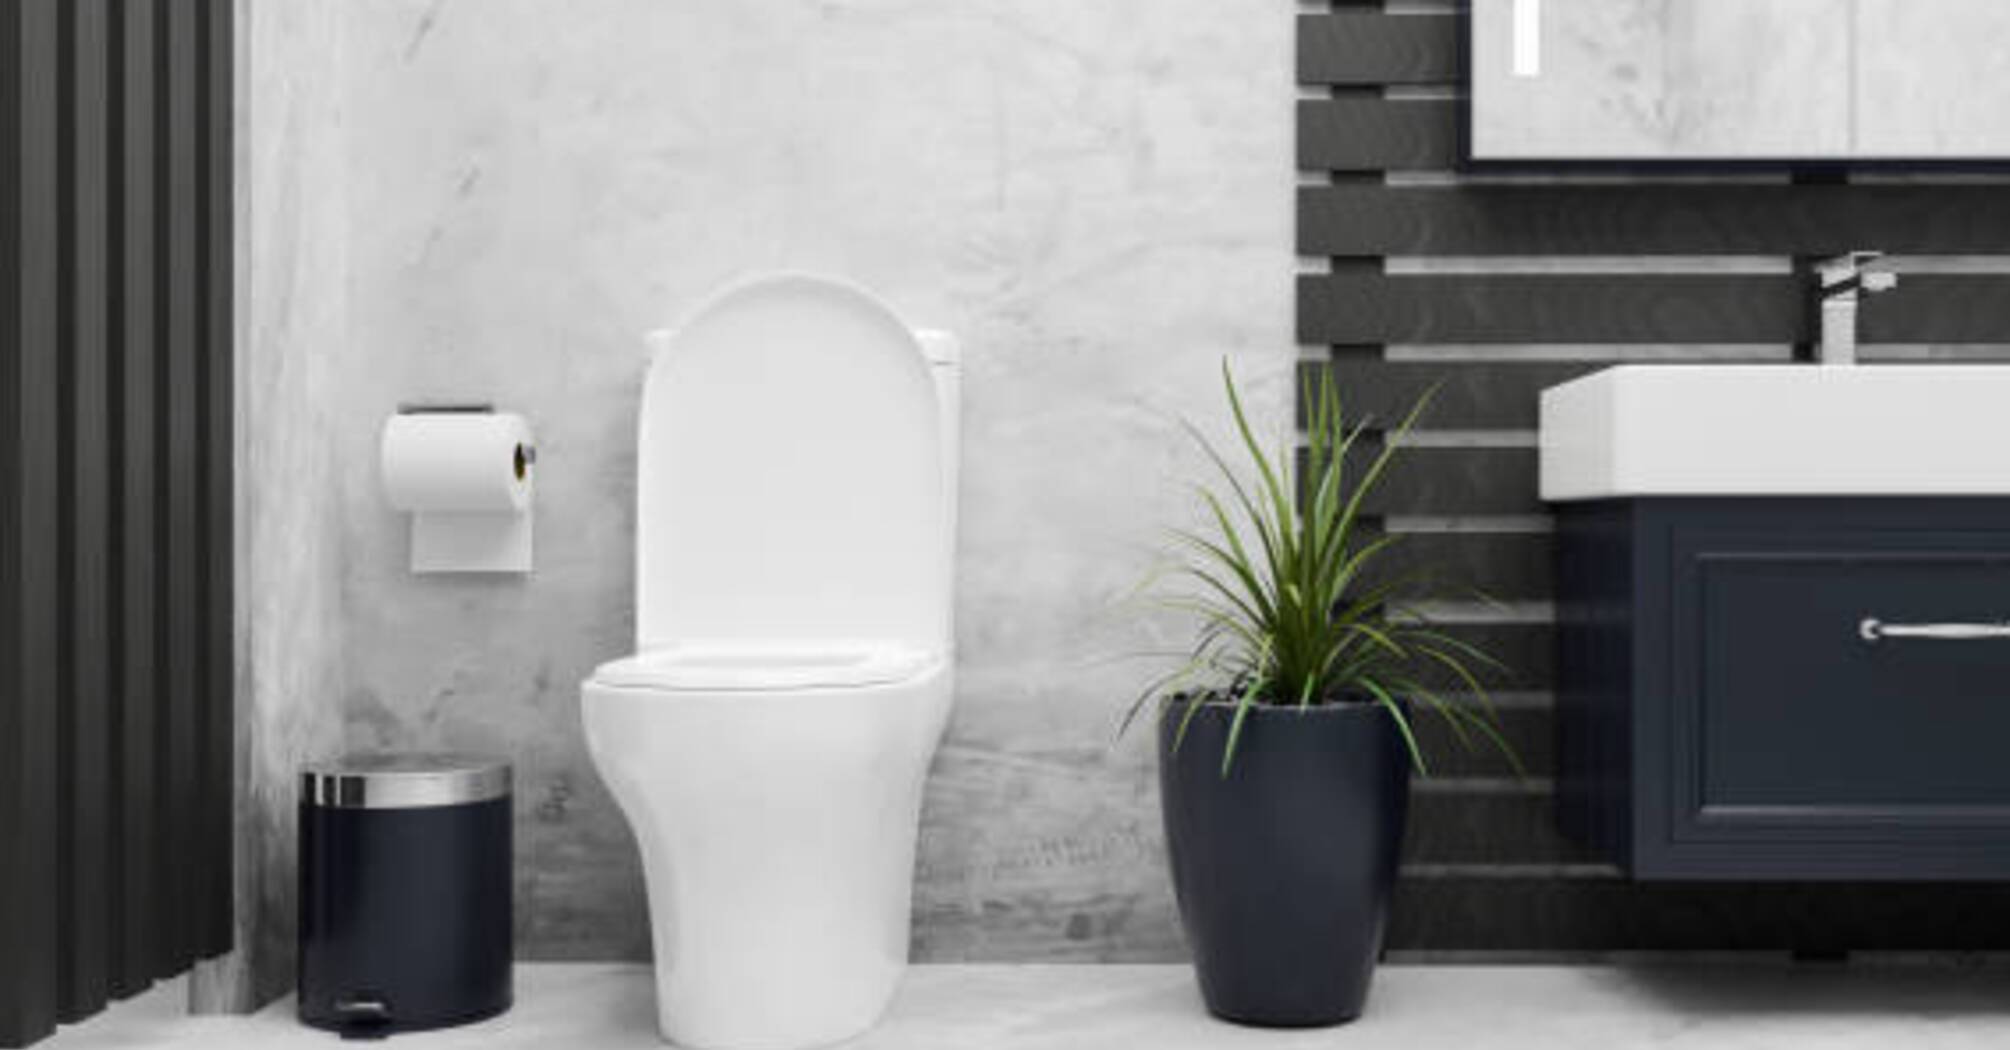 How to clean the toilet to shine: 3 useful life hacks